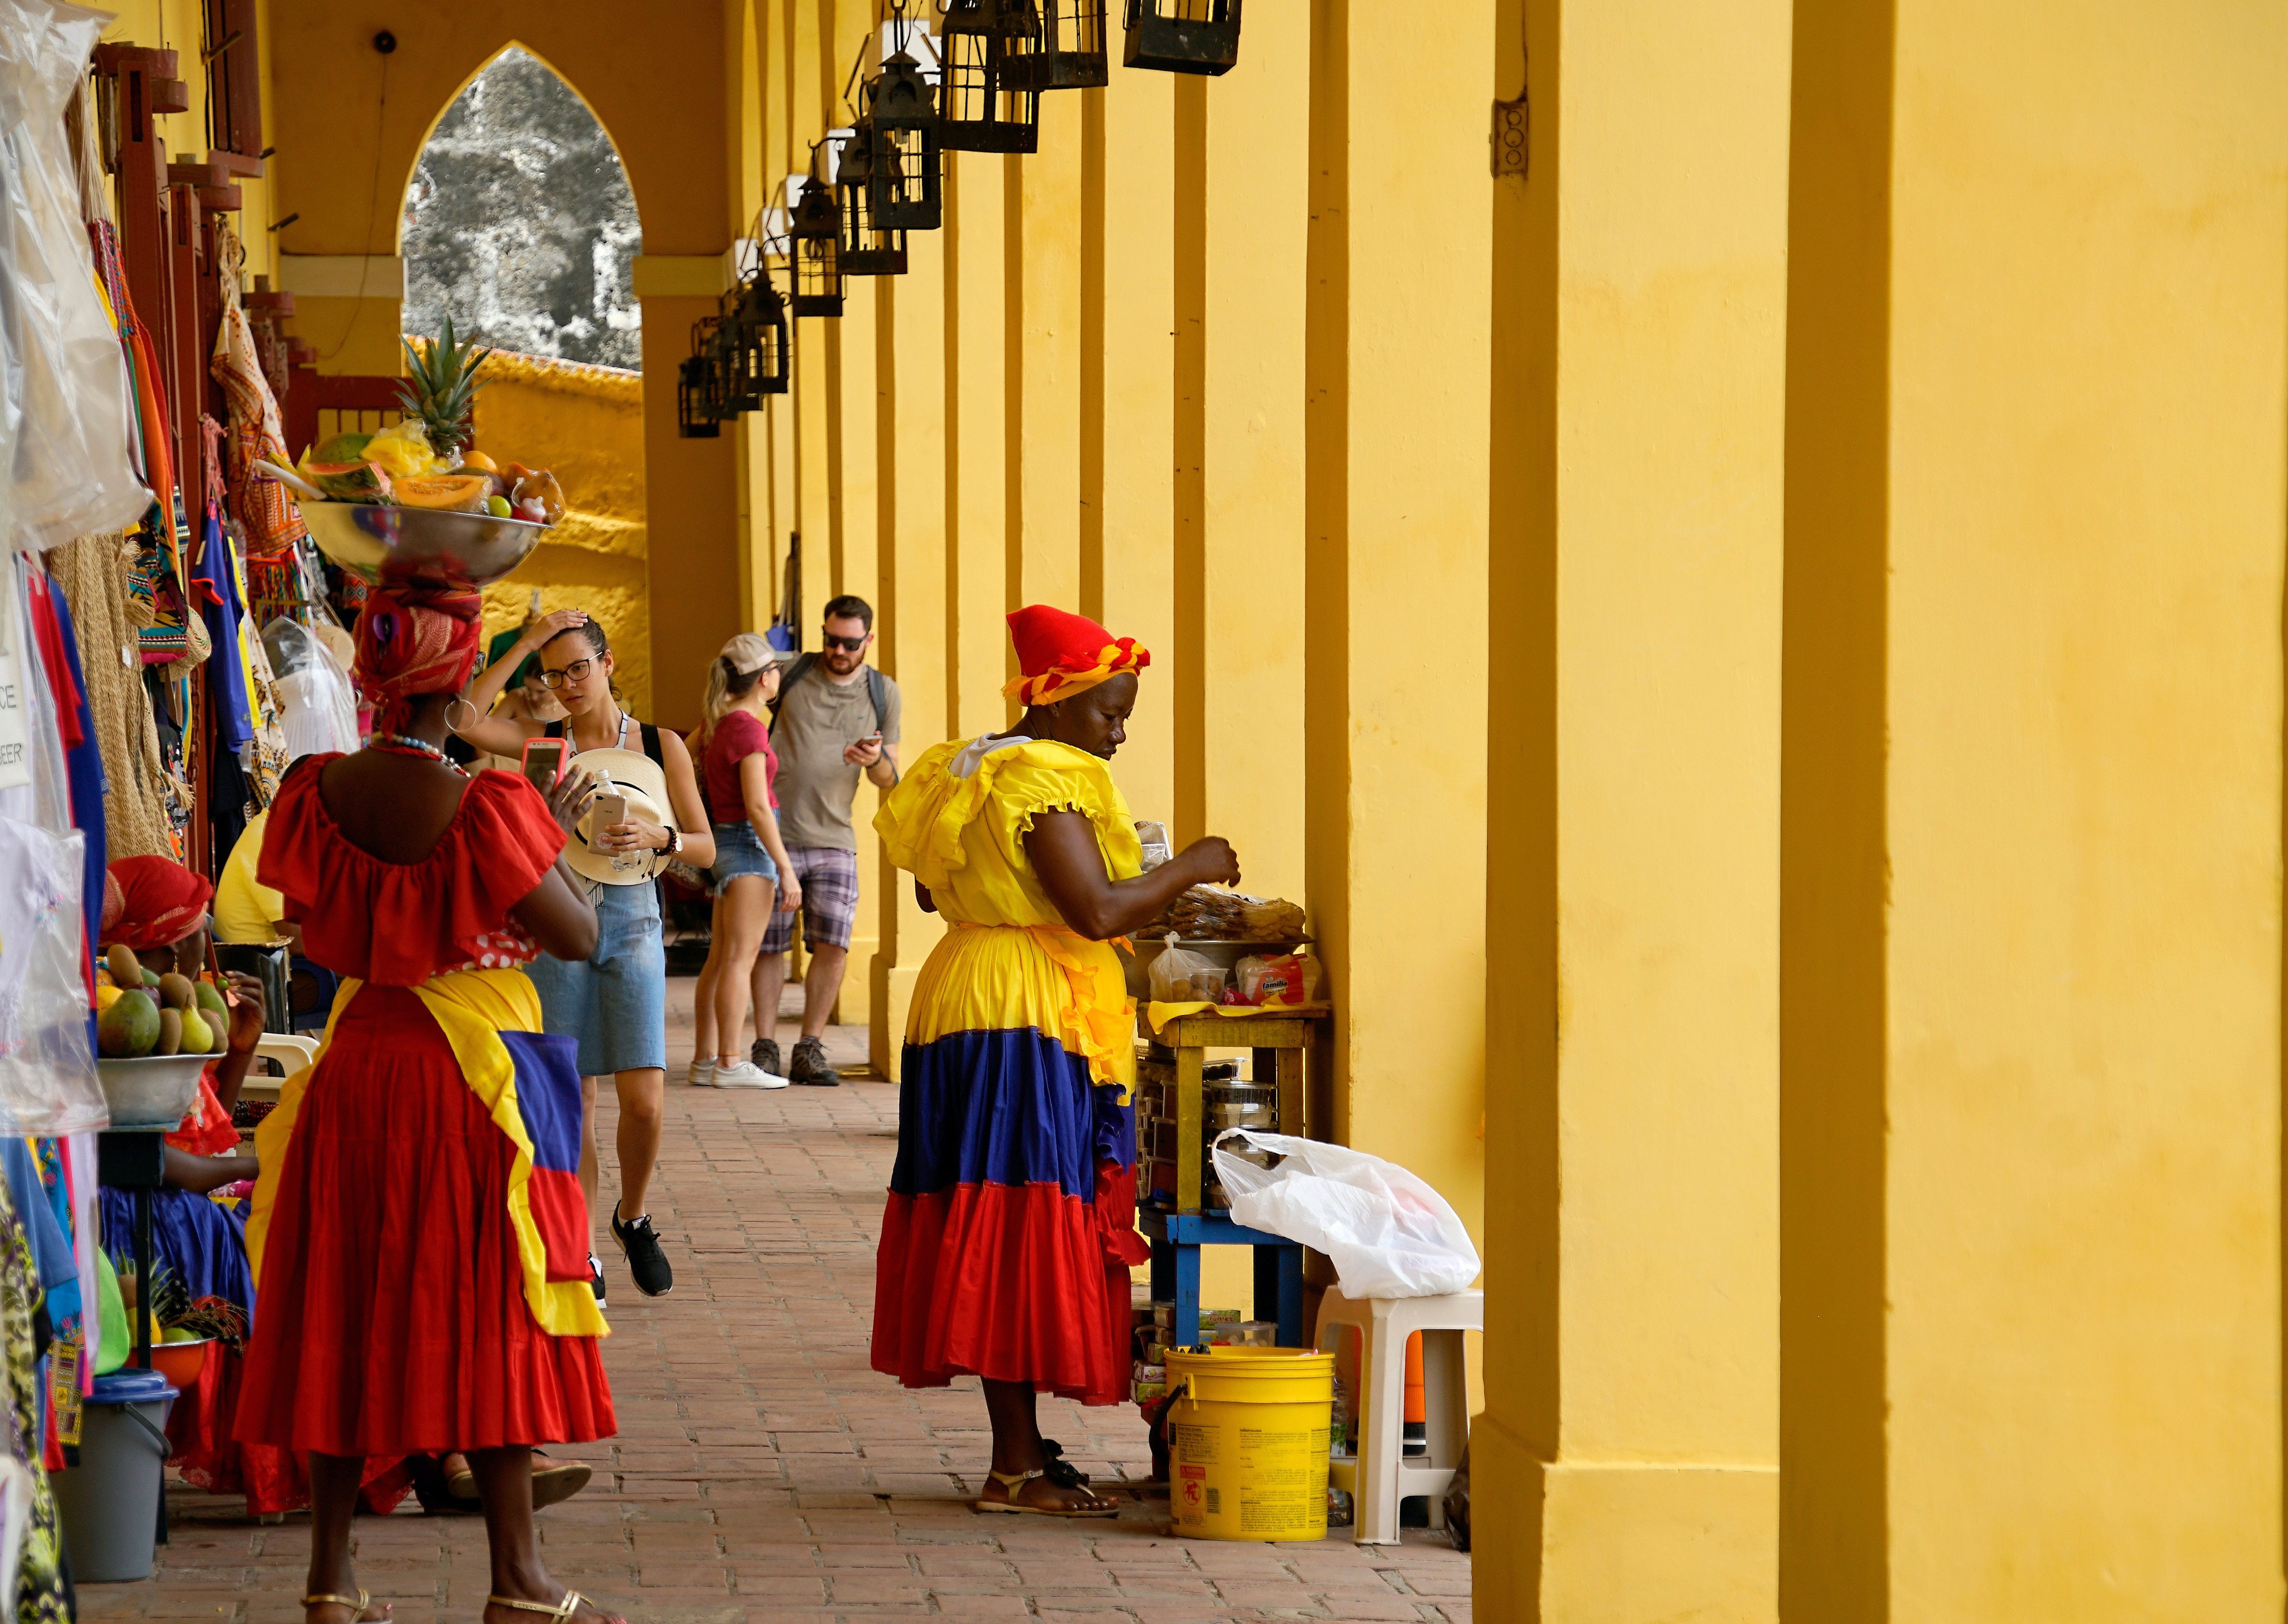 A market in Cartagena with women dressed in colorful clothing, Colombia 